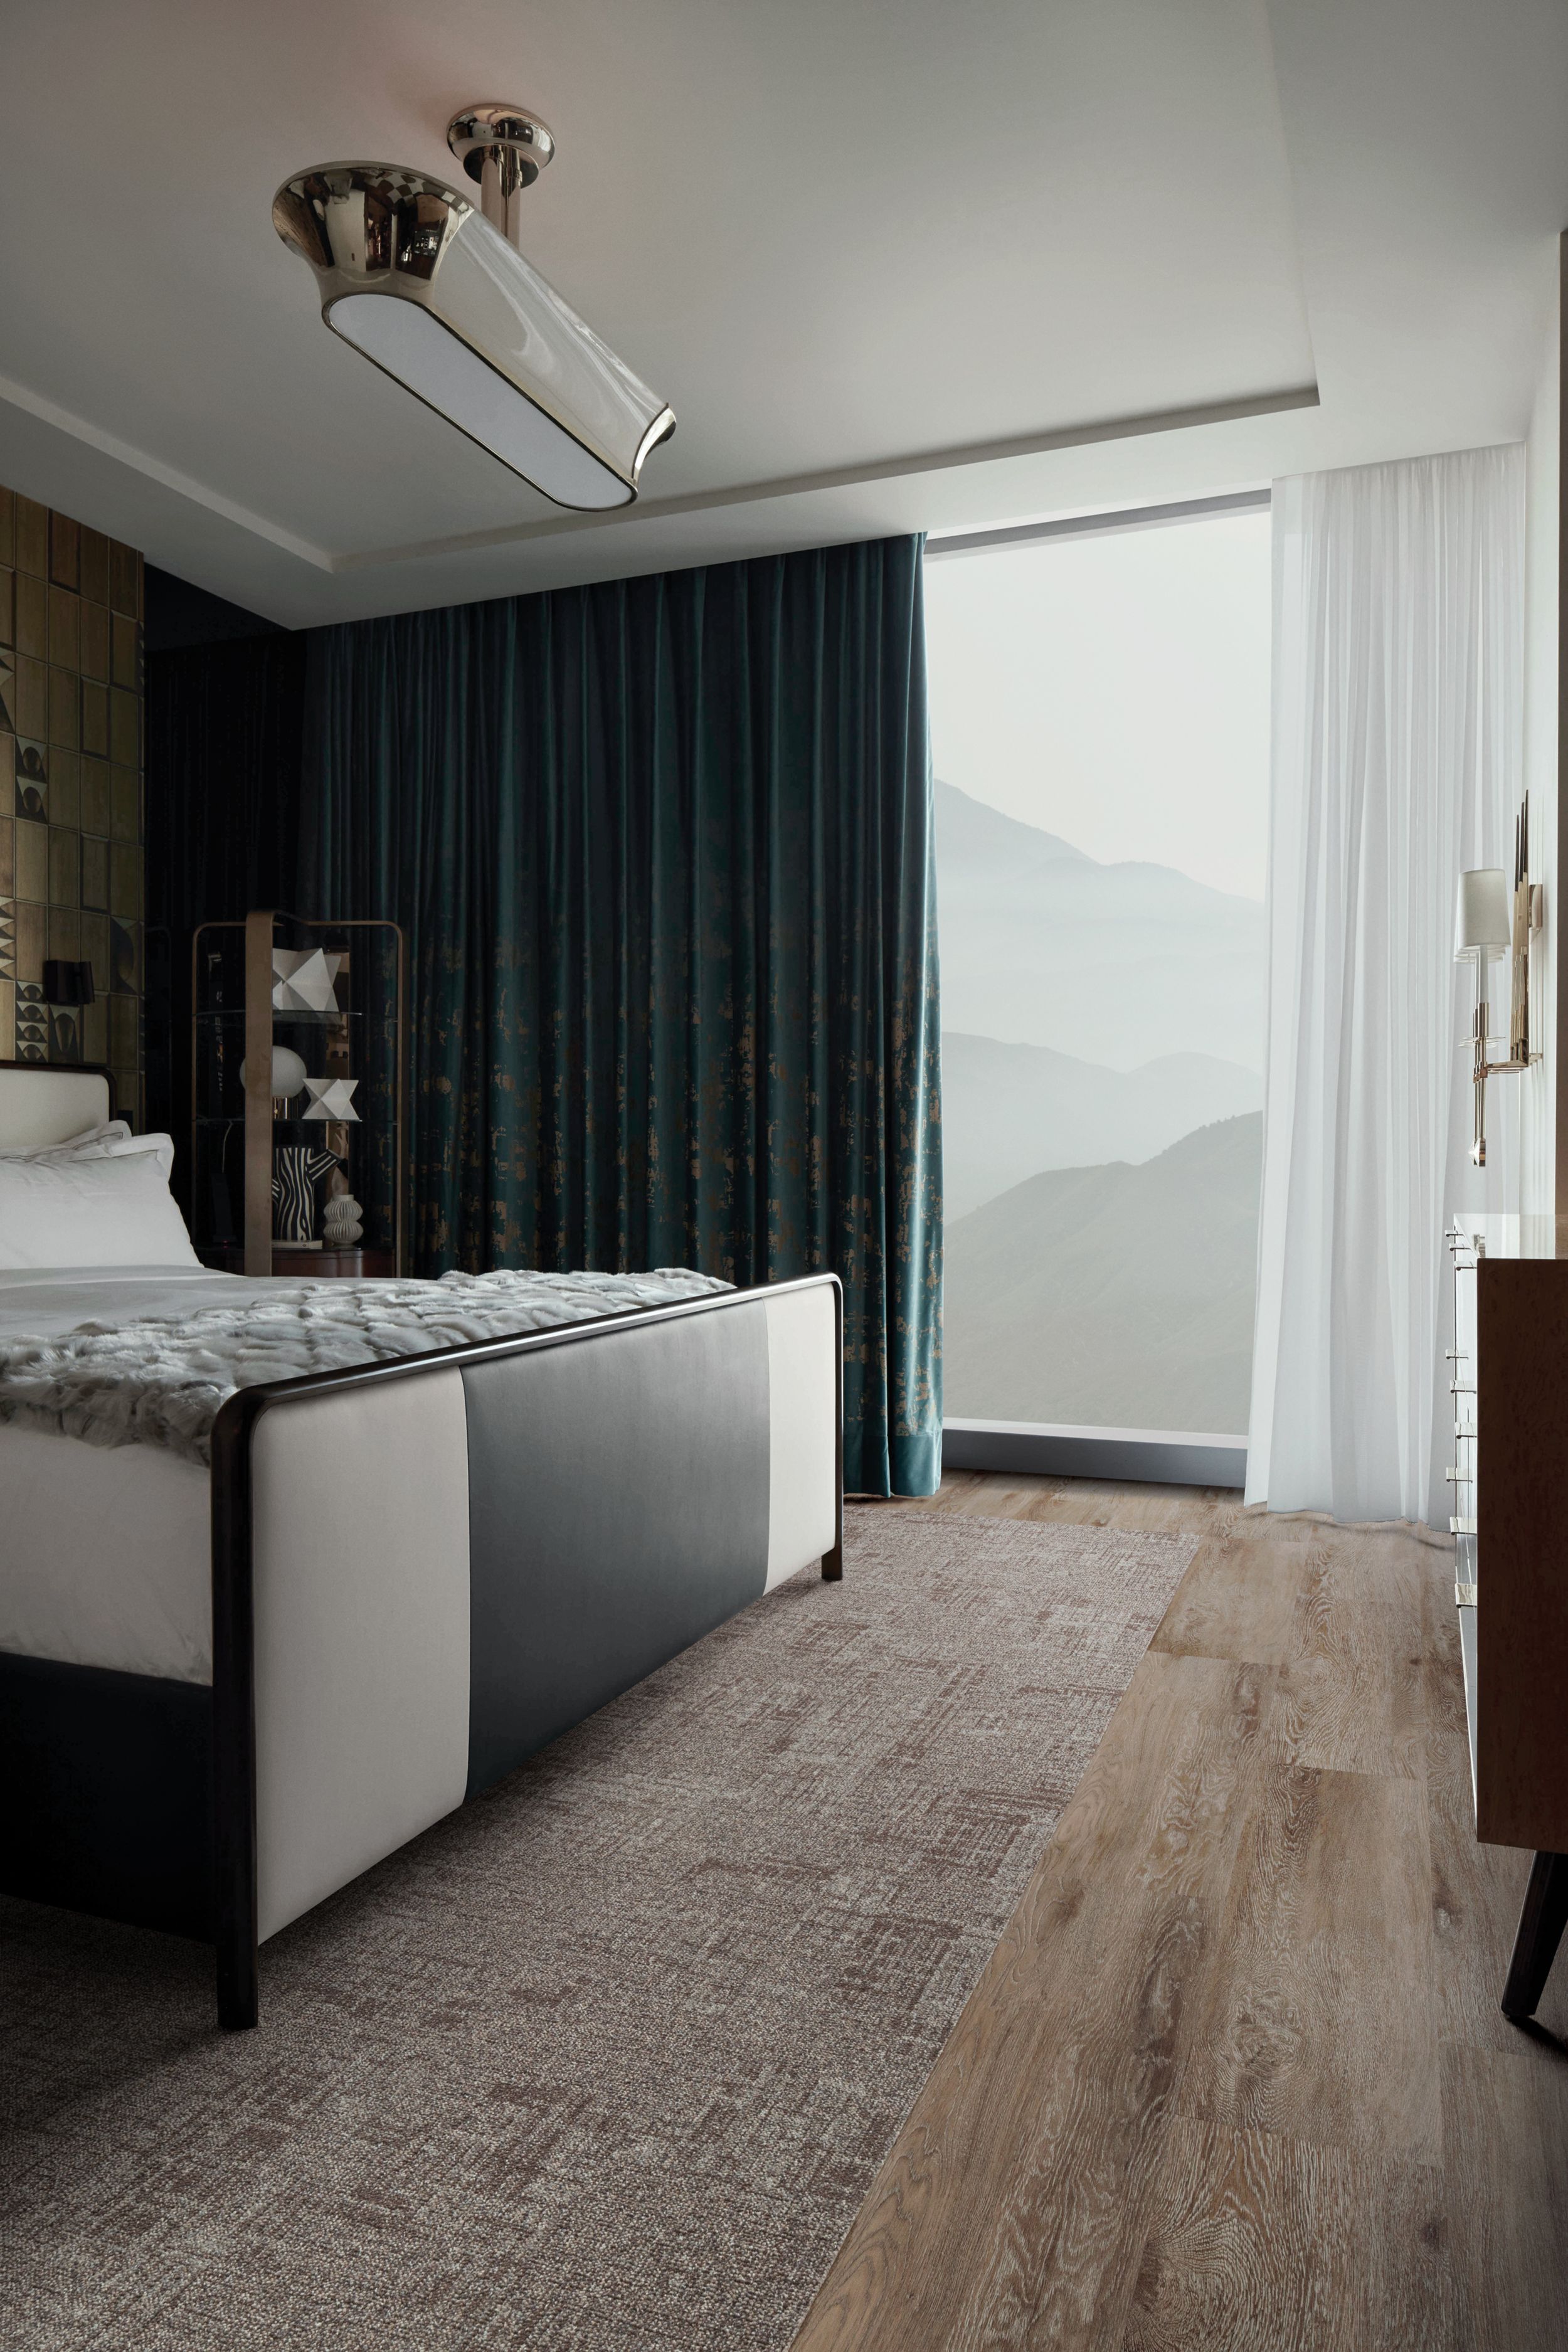 Interface RMS 701 plank carpet tile with Textured Woodgrains LVT in hotel guest room imagen número 4